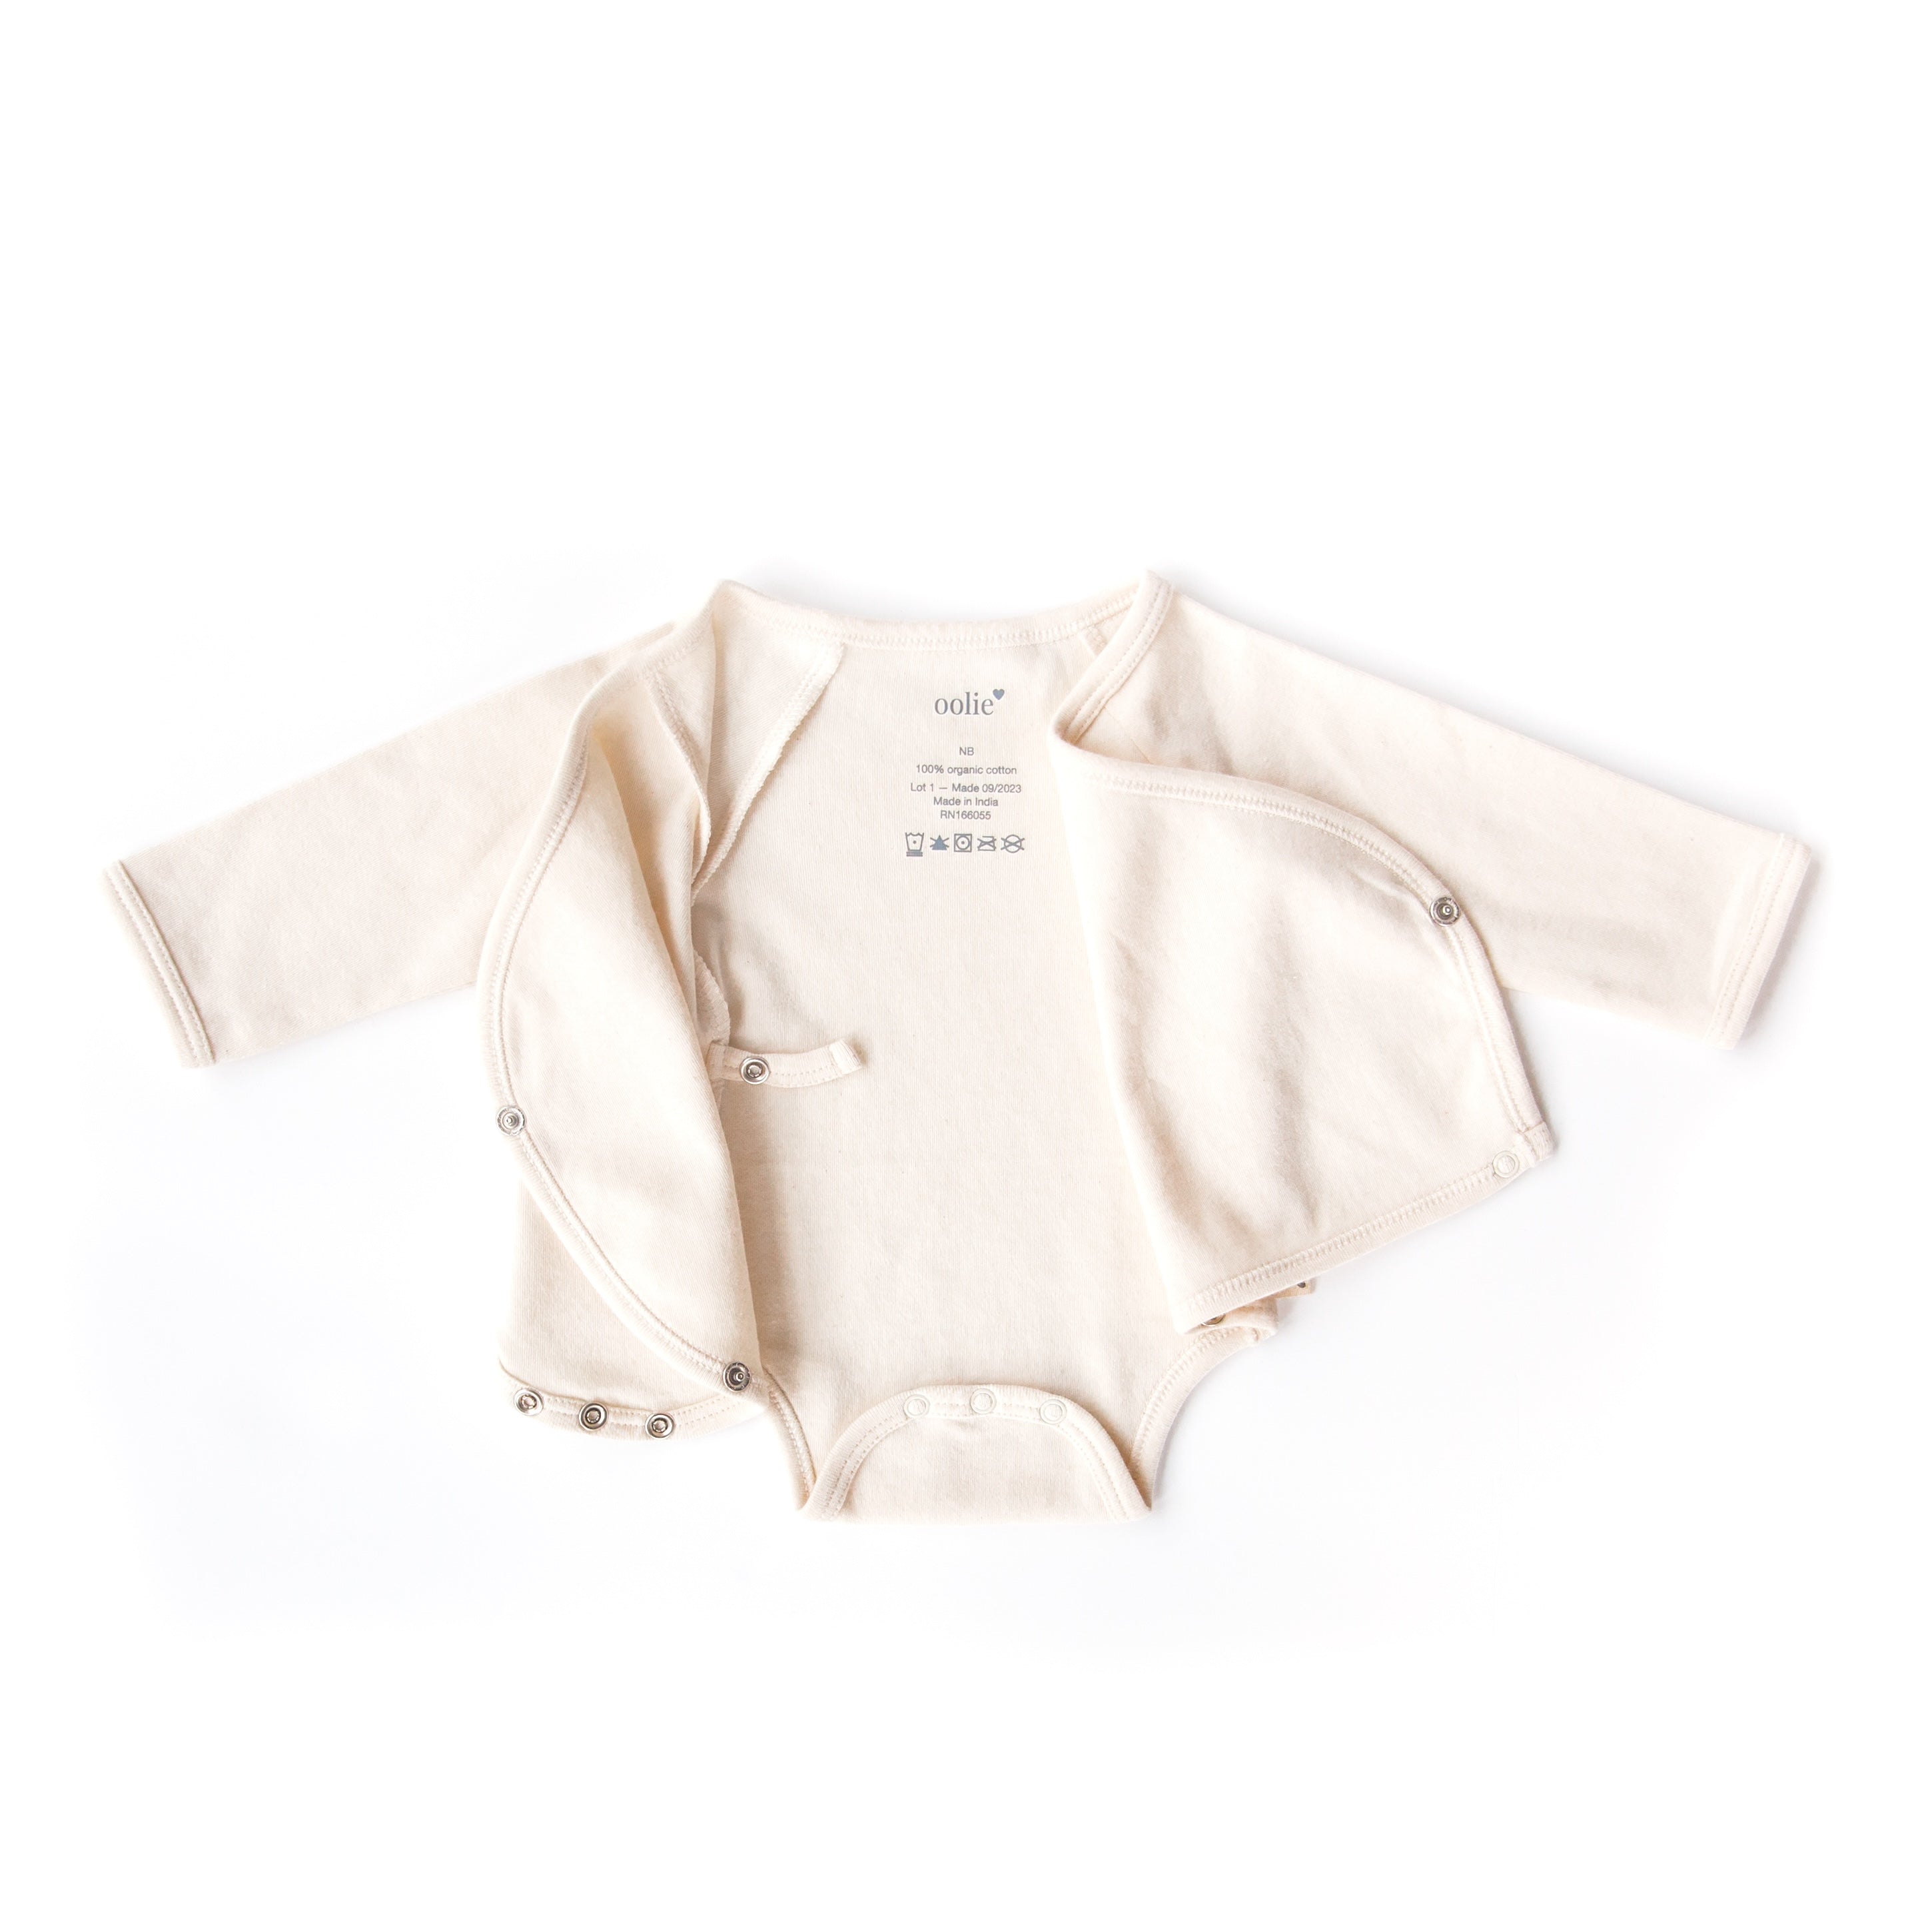 A natural color, Oolie organic cotton onesie, laid flat on a white background, fully unsnapped and with both left and right kimono-style flaps folded open to illustrate the shape of the garment.